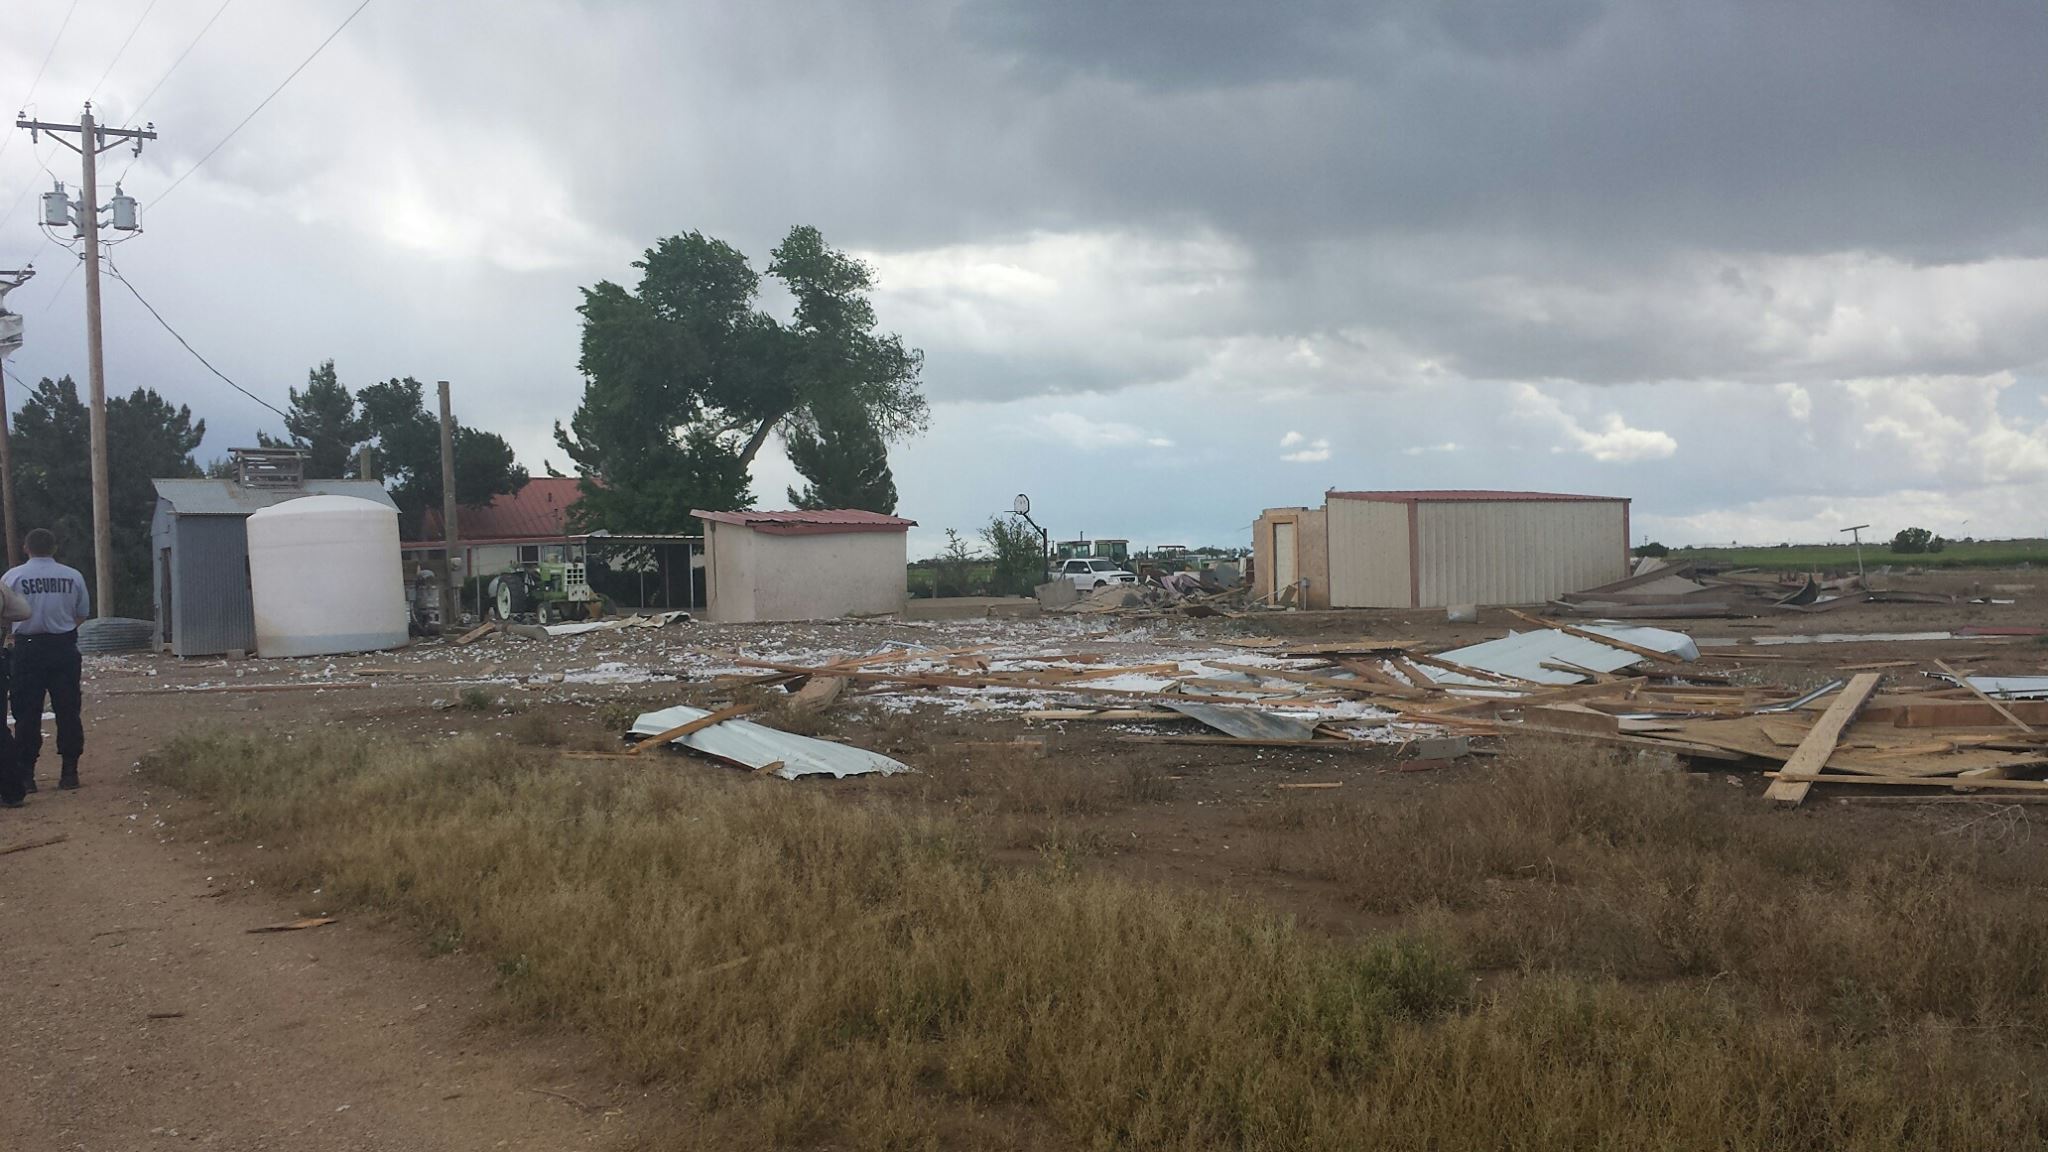 Damage from a tornado in Roswell, New Mexico